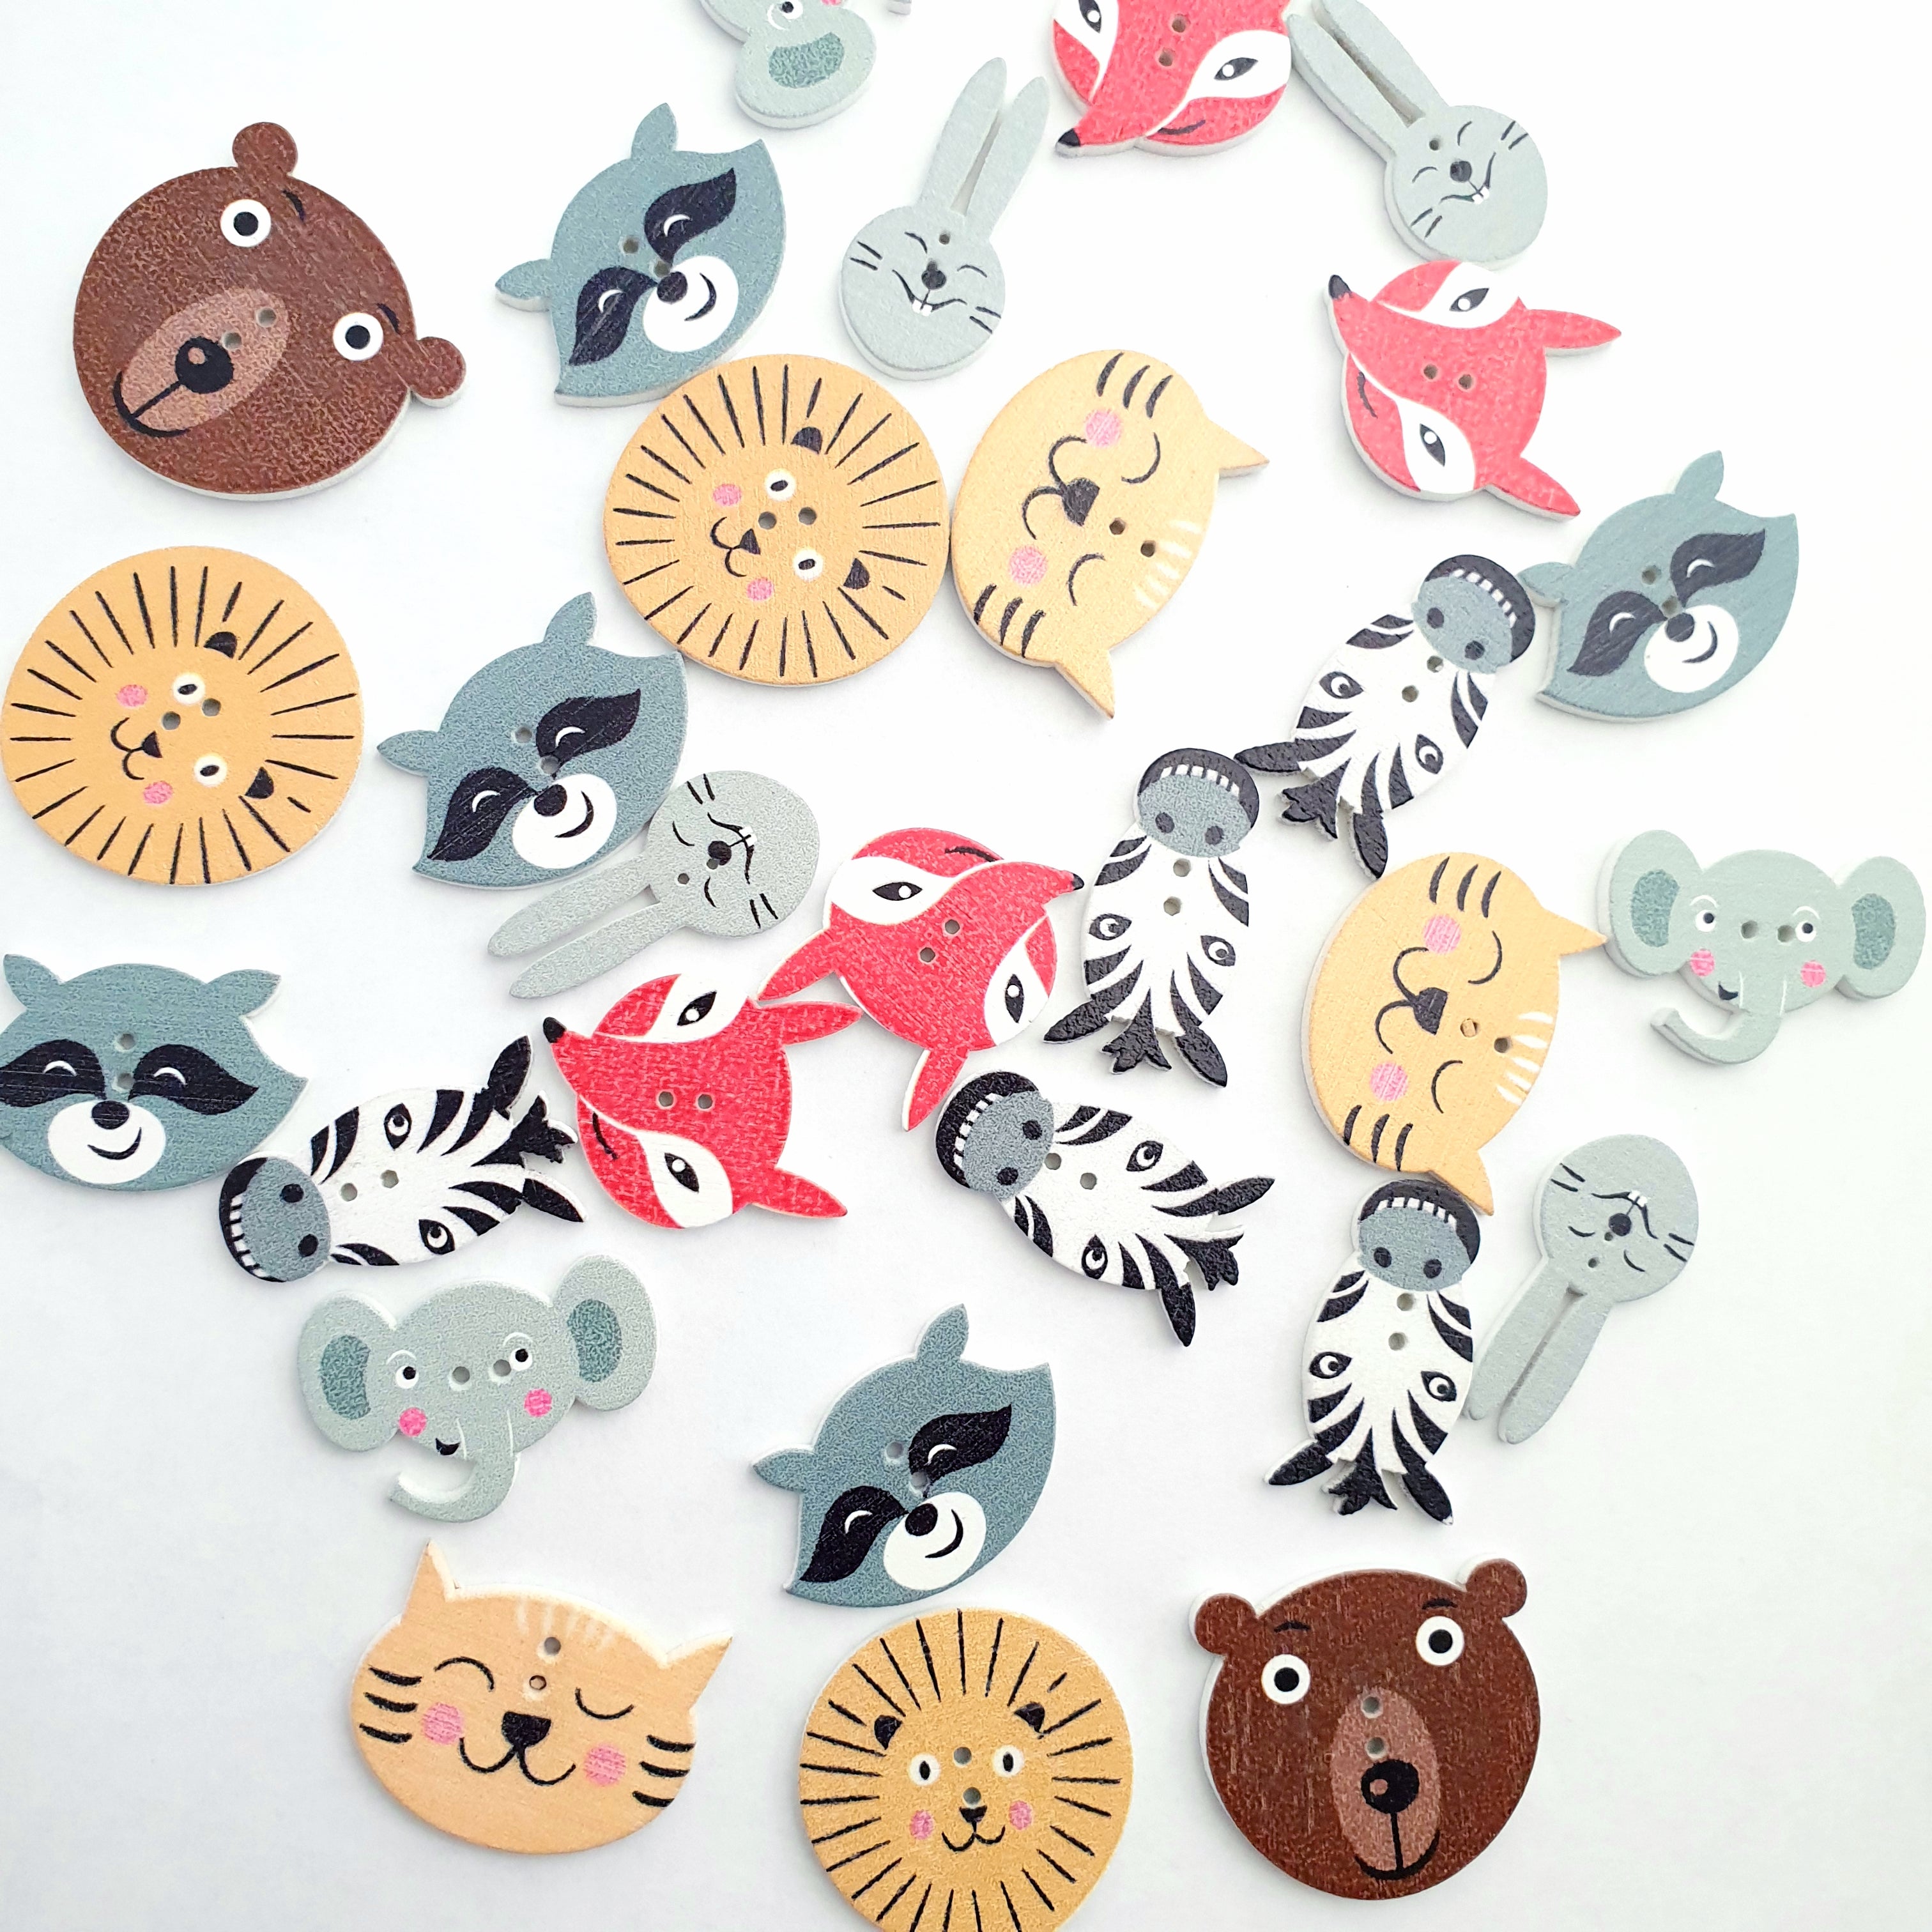 MajorCrafts 24pcs Mixed Animal Theme 2 Holes Sewing Wooden Buttons